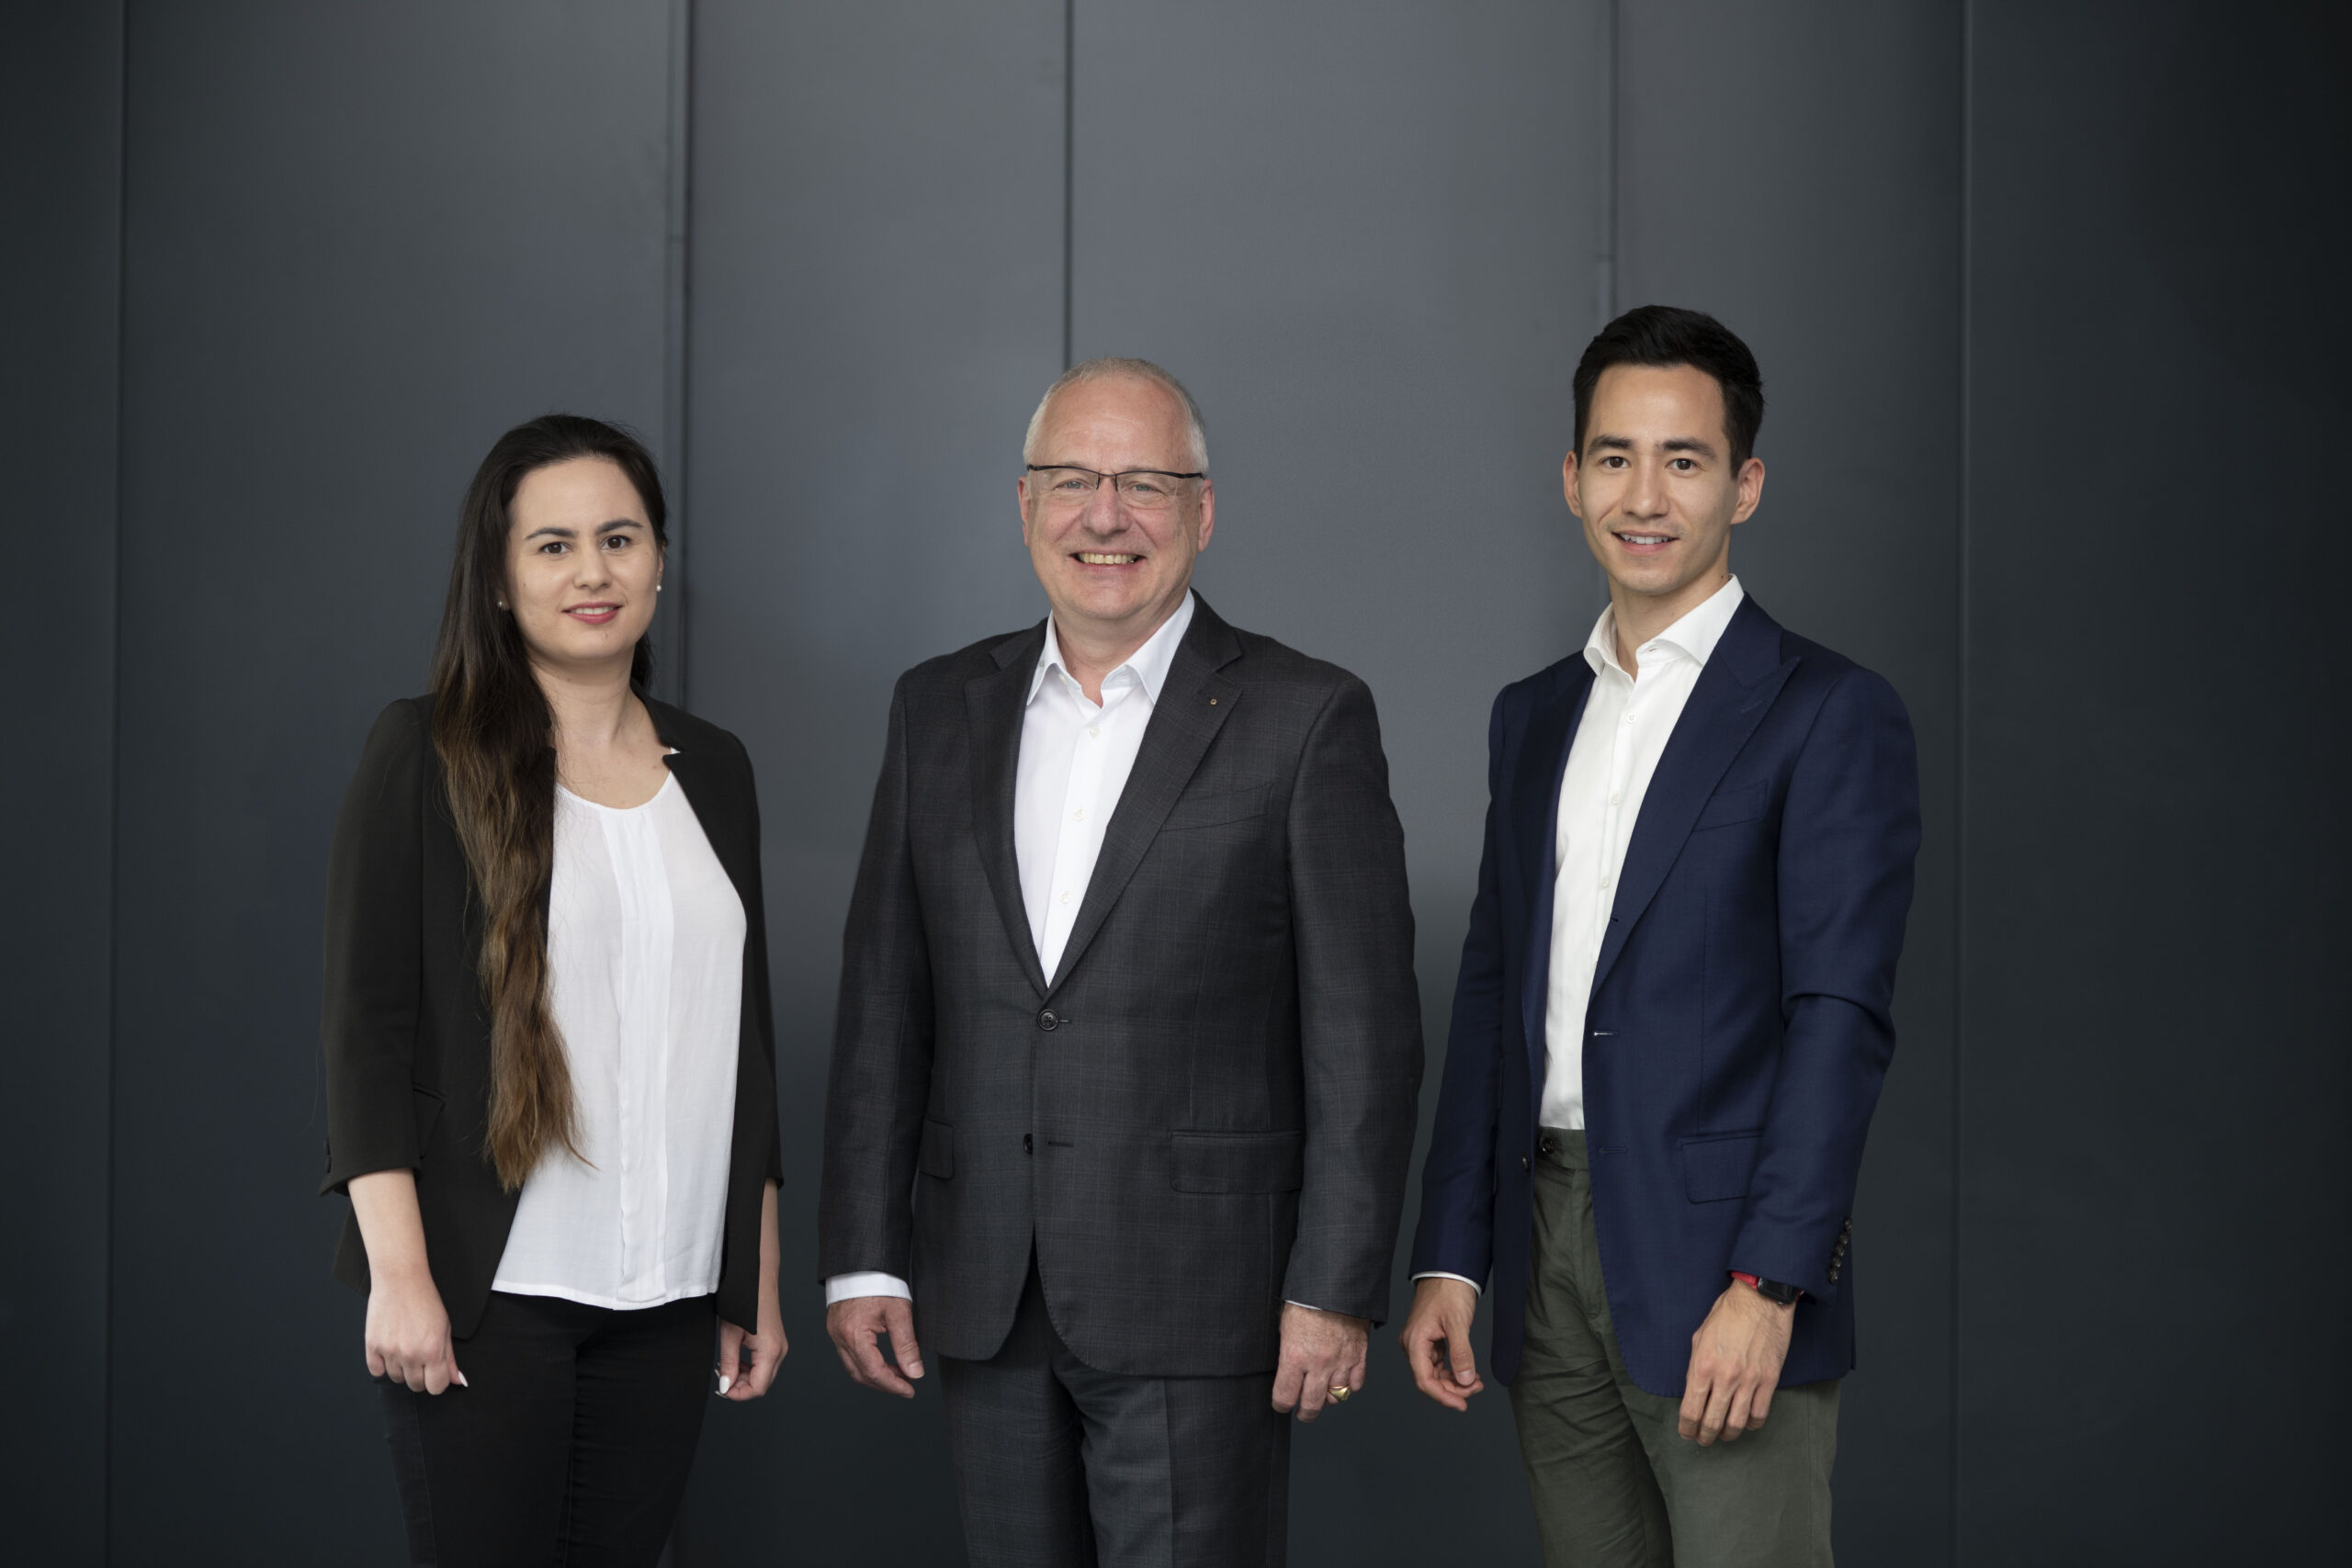 <b>Family business</b><br/>URMA is a modern Swiss family business currently run in second generation, with the third generation already operationally on board.